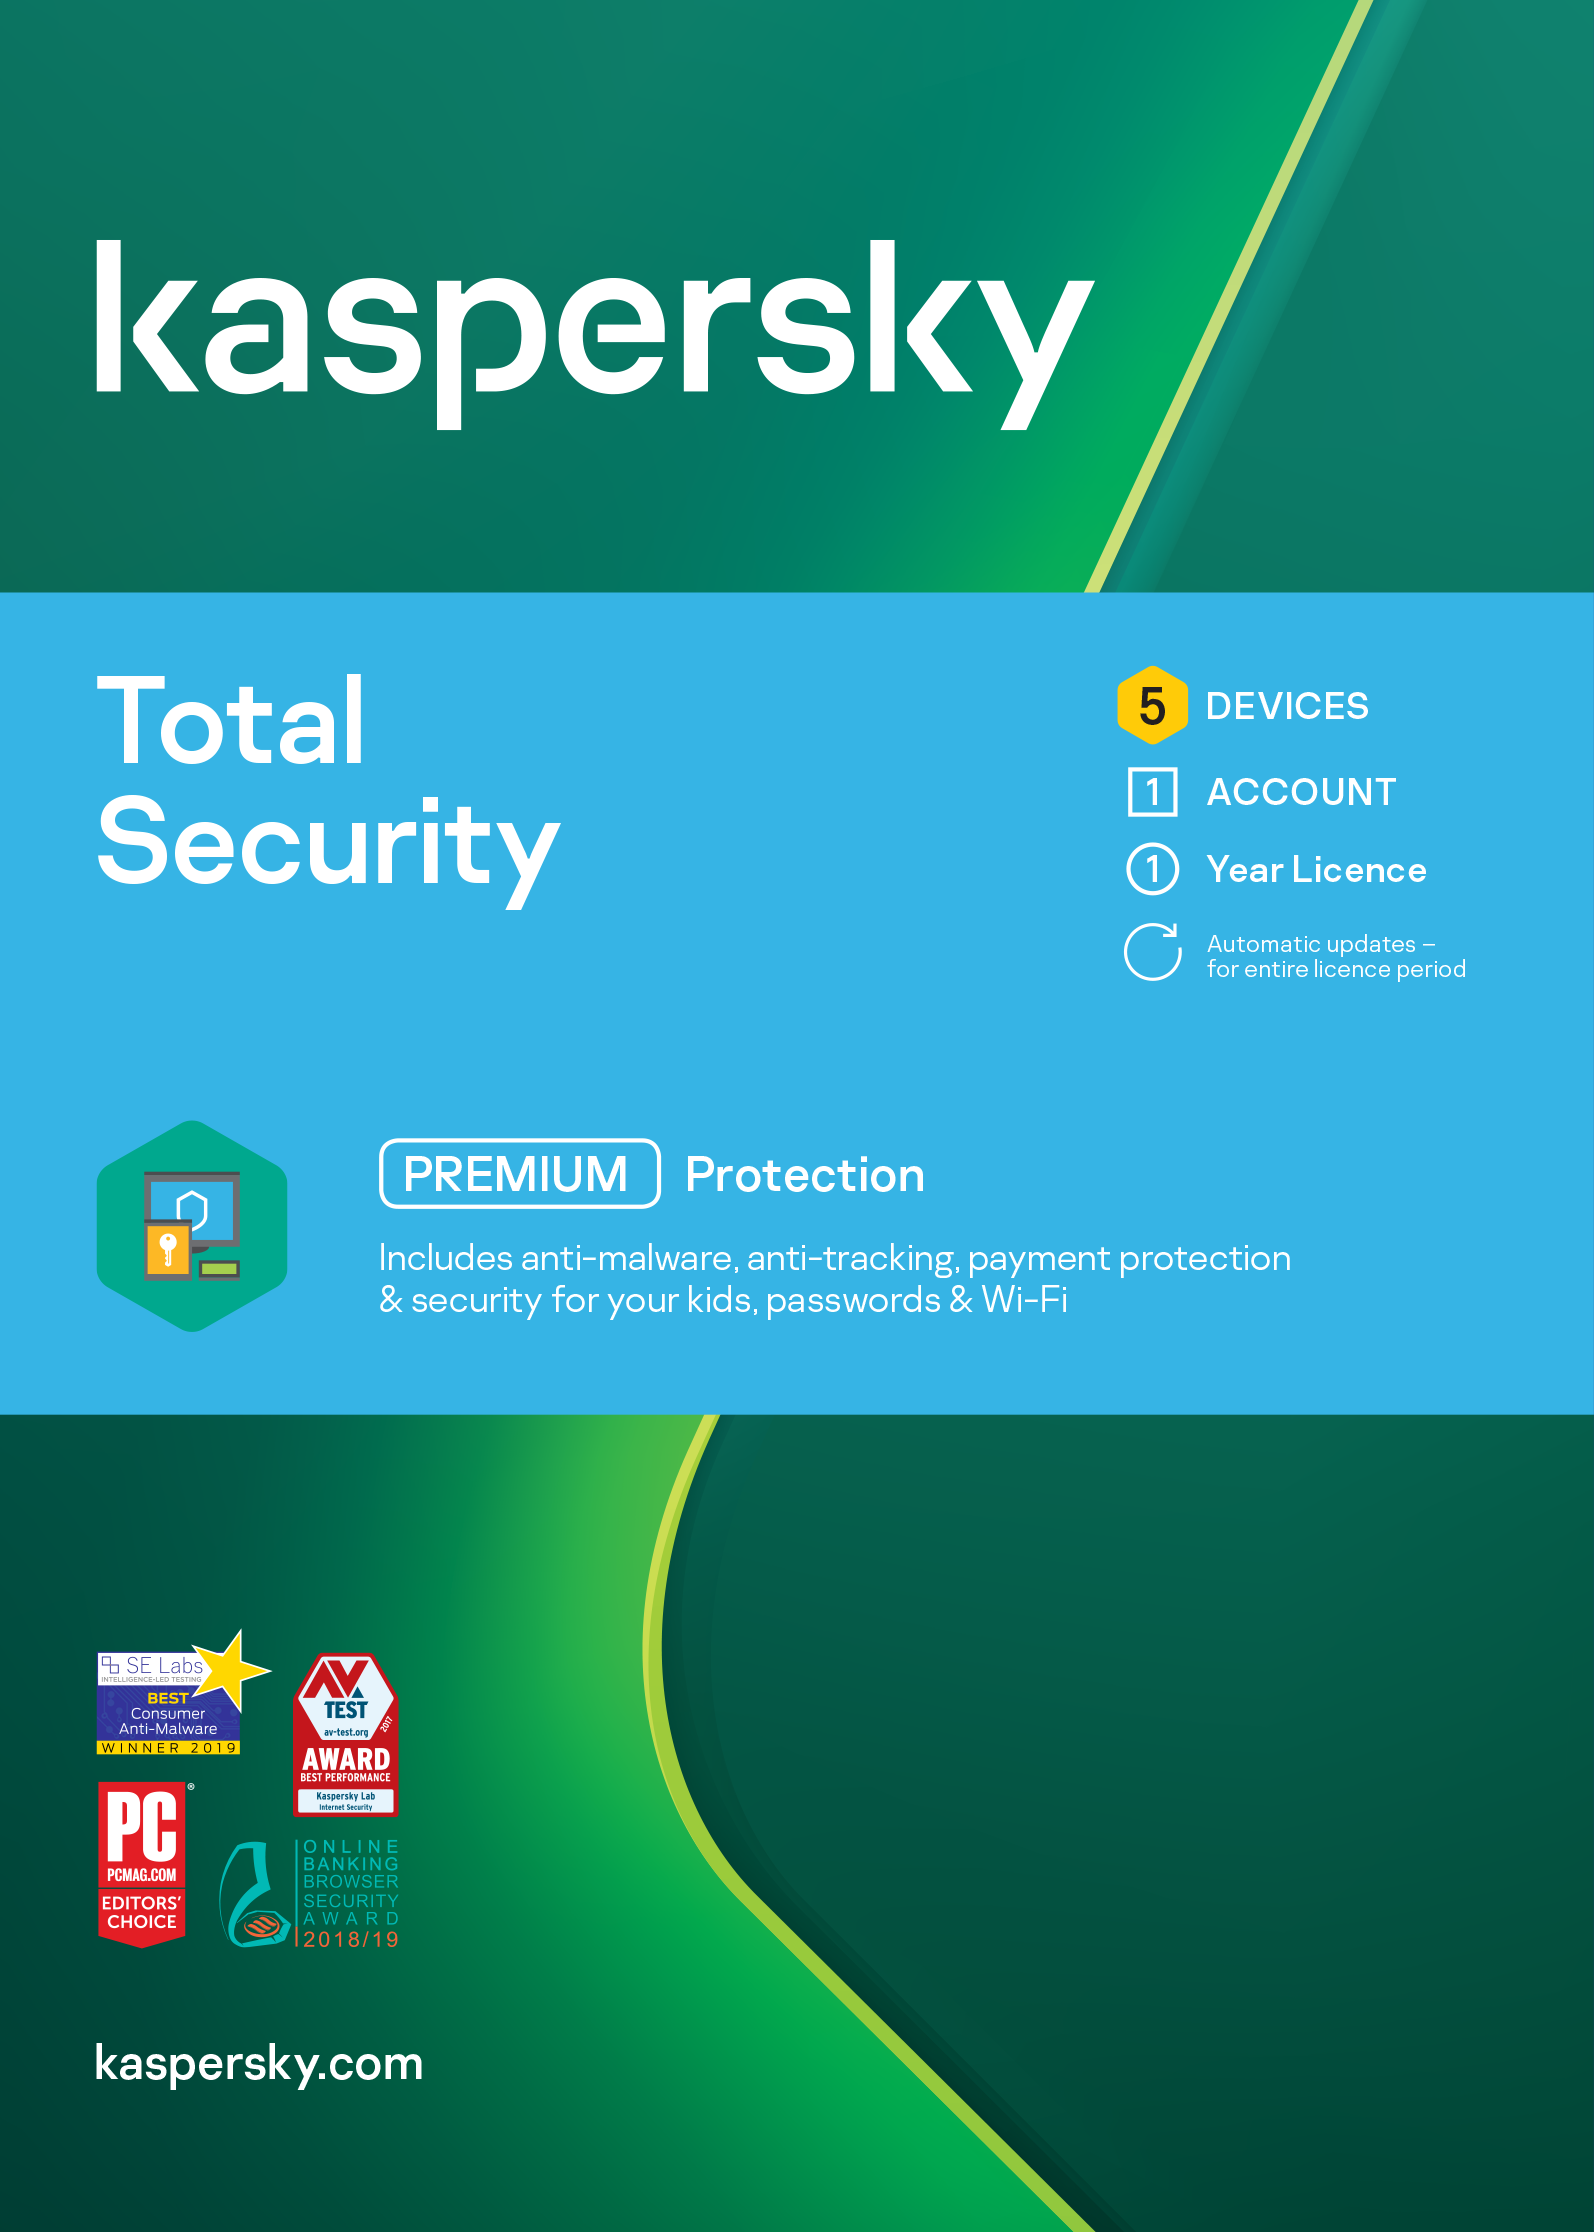 Kaspersky Total Security 5 devices